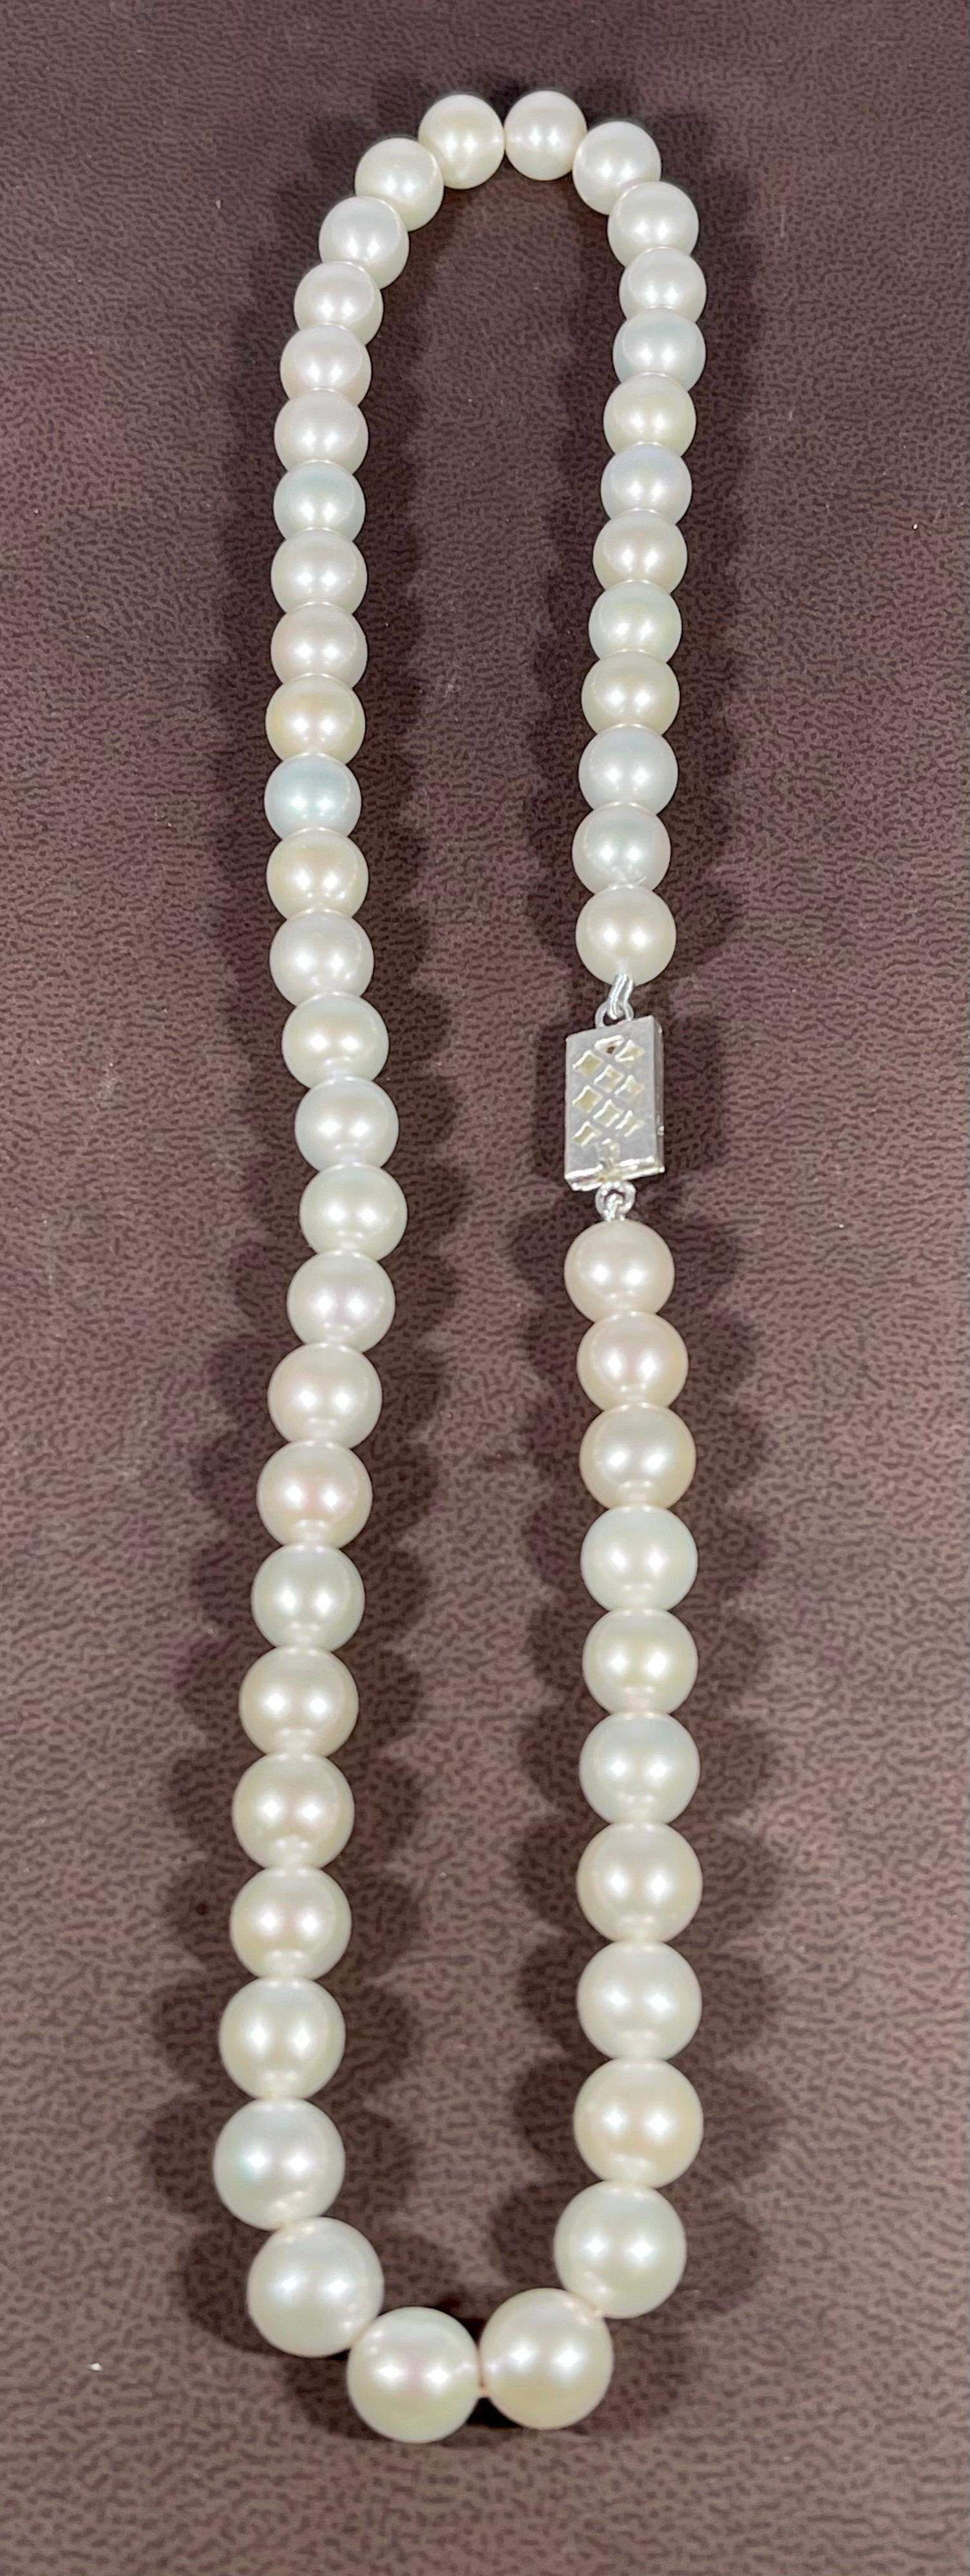 51 Round White Fresh Water  Pearls Strand Necklace Set in Silver Clasp In Excellent Condition For Sale In New York, NY